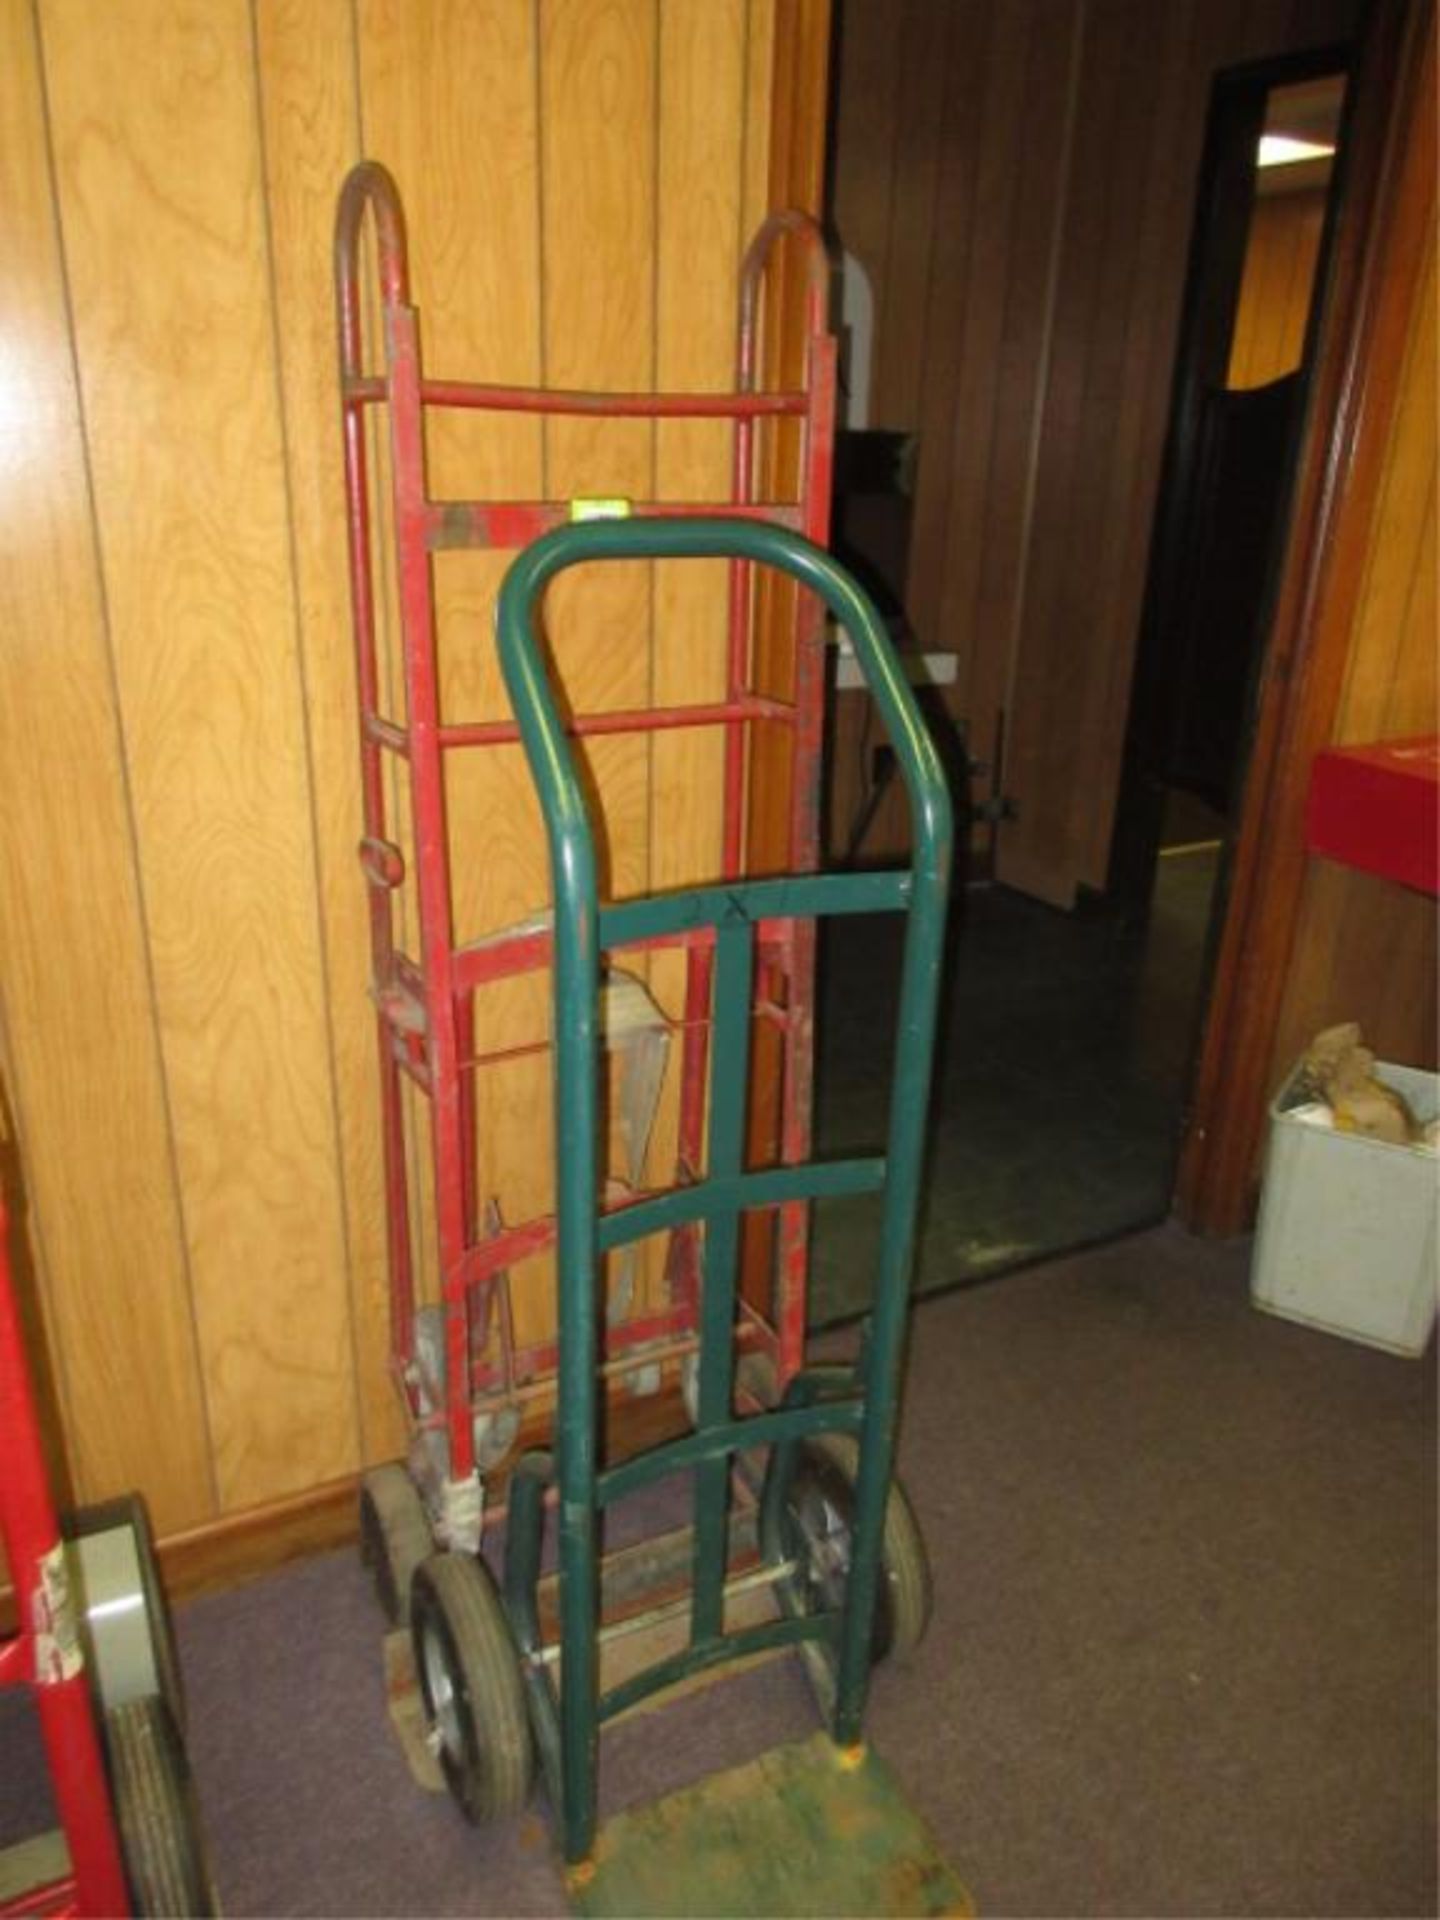 Lot of (2) 2-Wheel Hand Trucks. HIT# 2179452. conf. room. Asset Located at 10 Valley St, Pulaski,